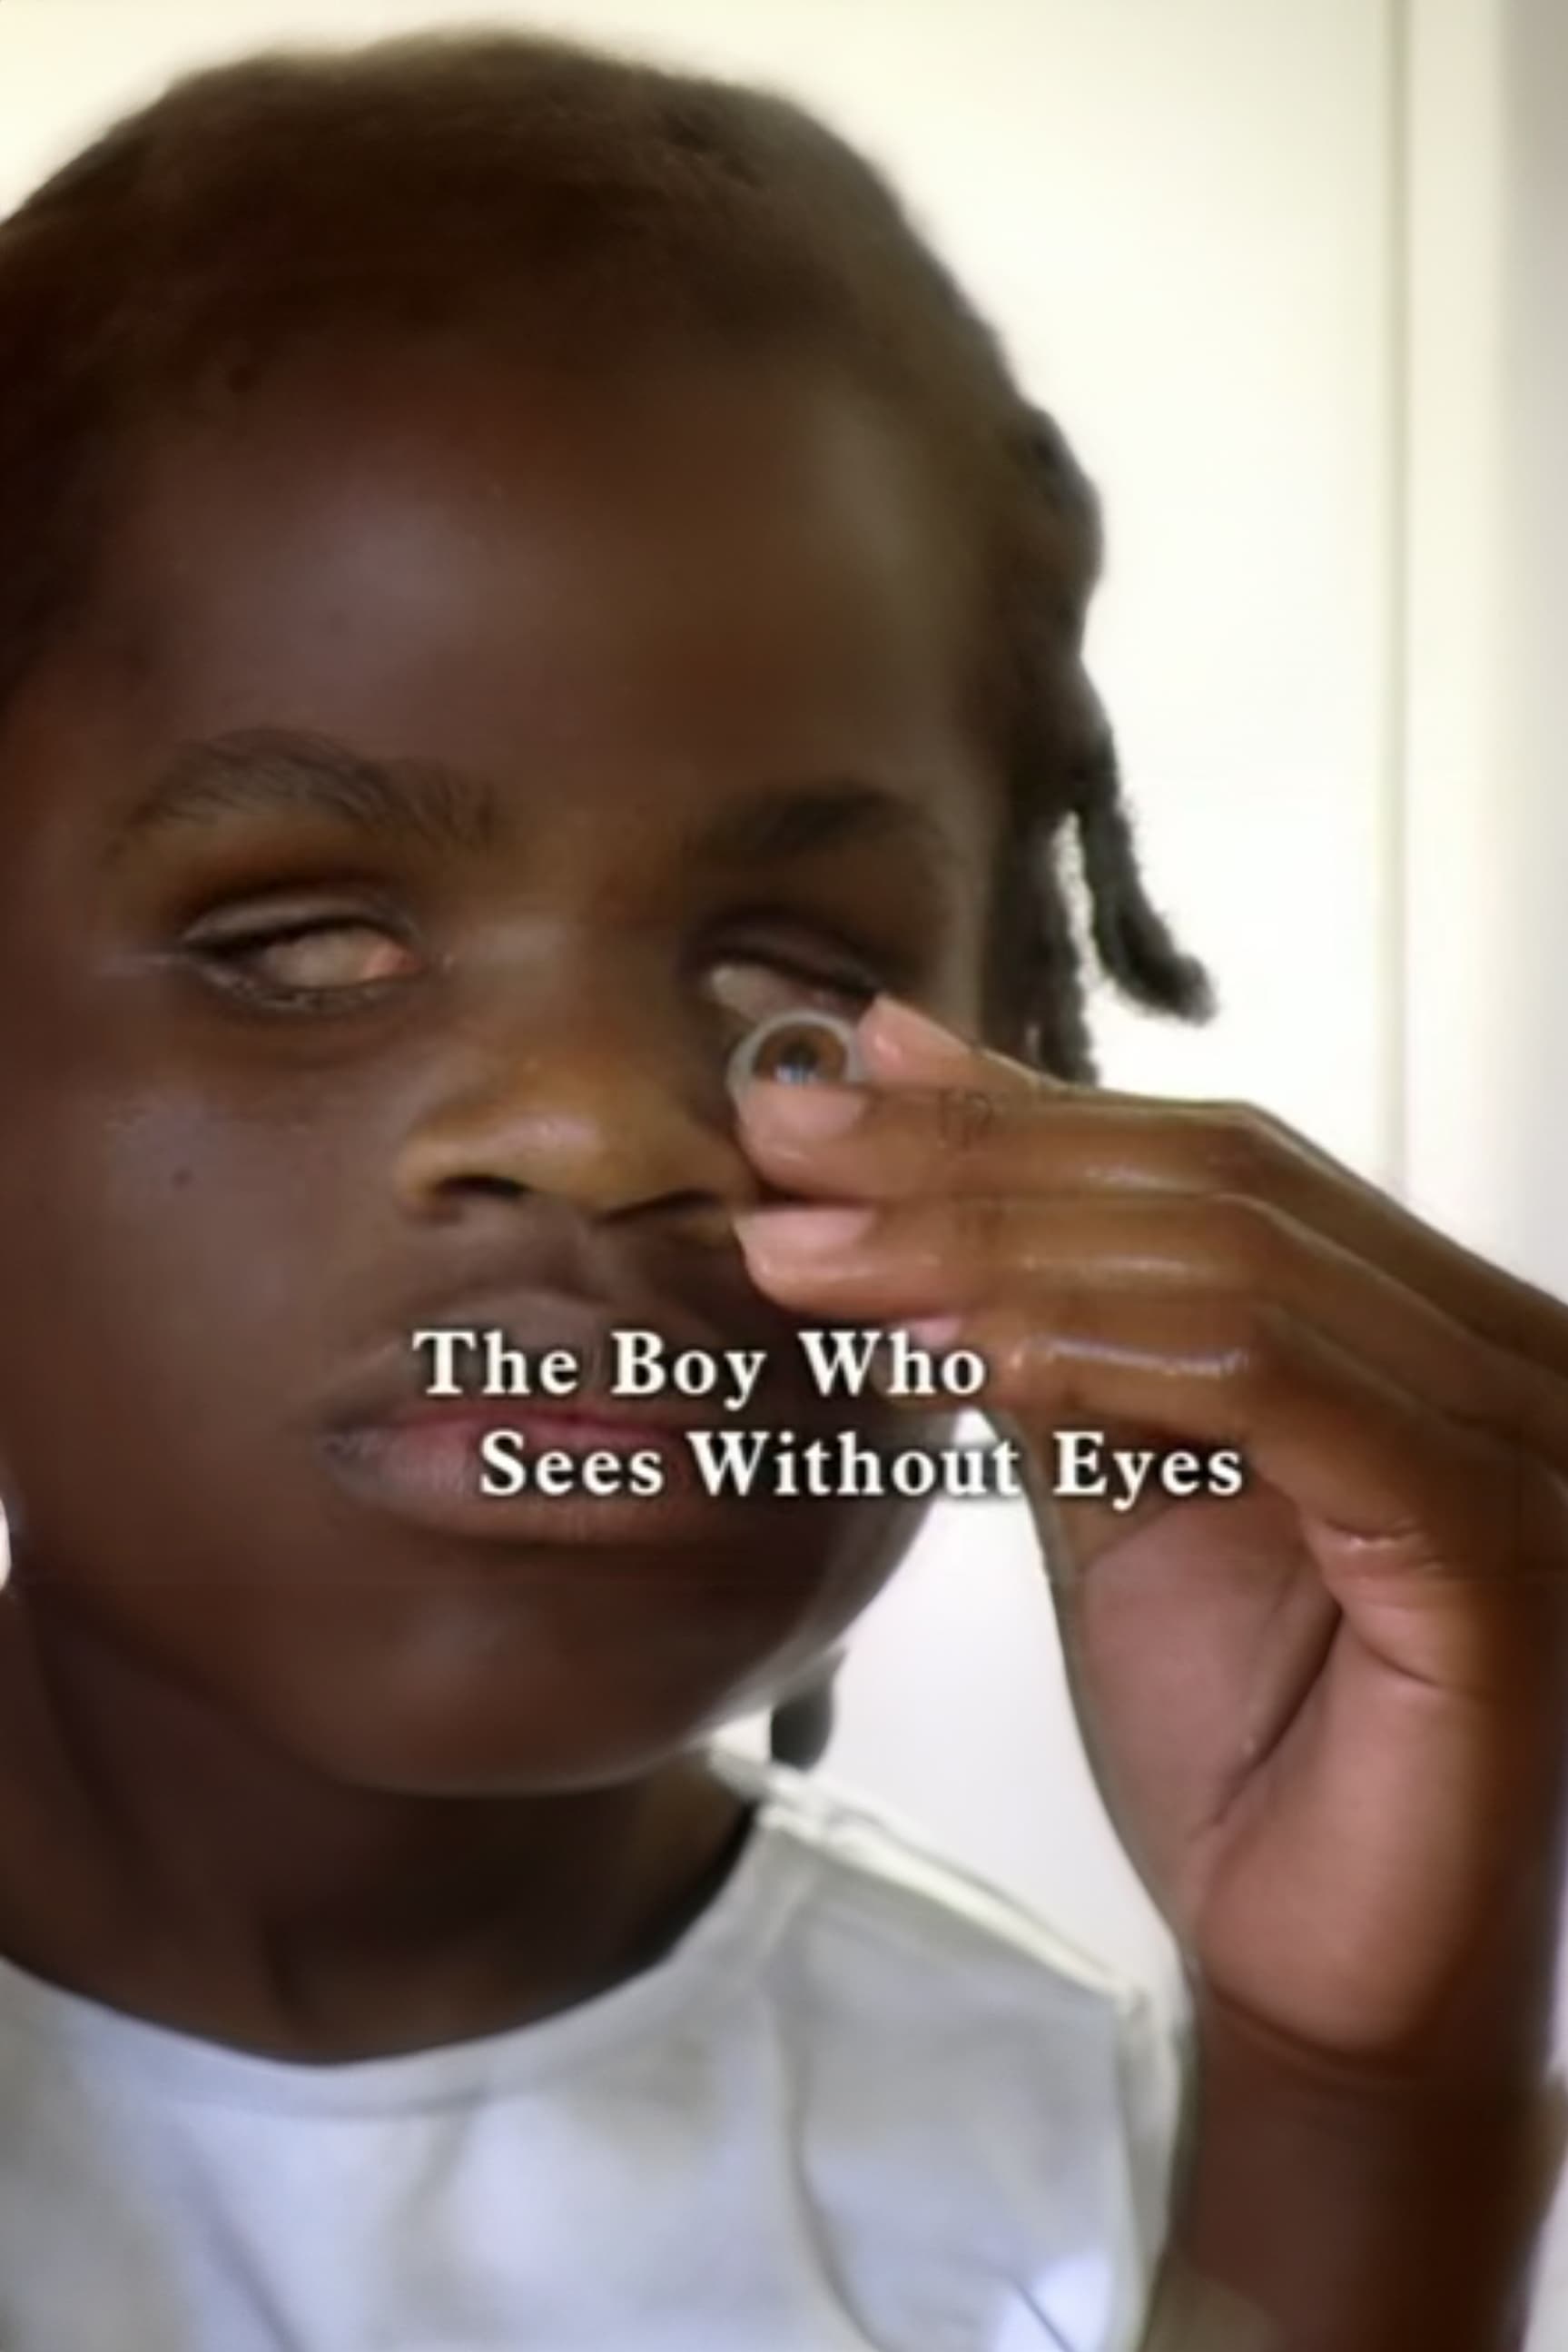 The Boy Who Sees Without Eyes